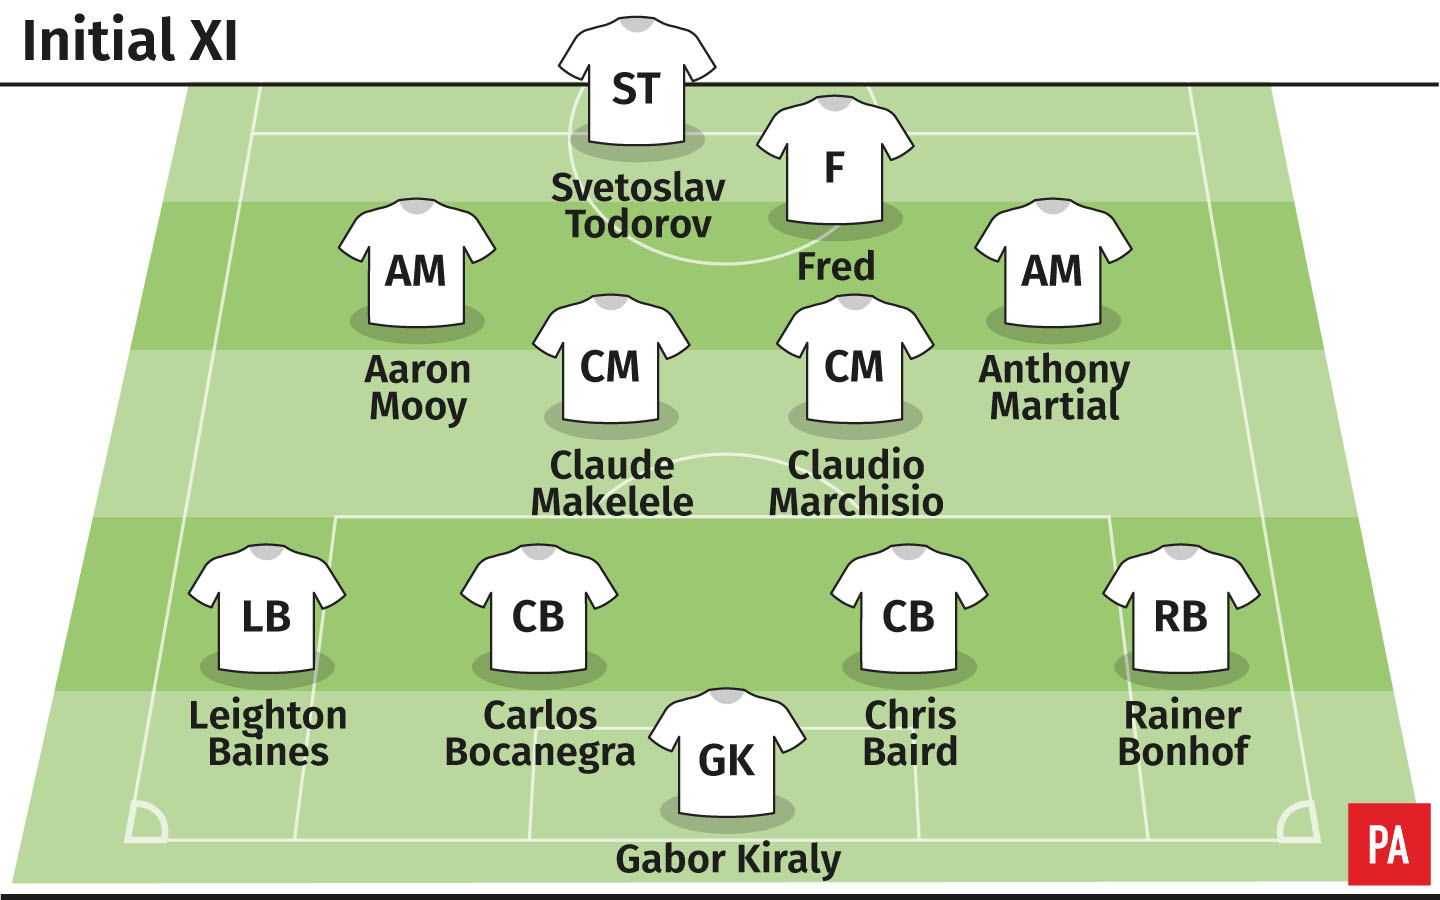 A graphic showing an XI of footballers whose initials also reflect their position on the pitch